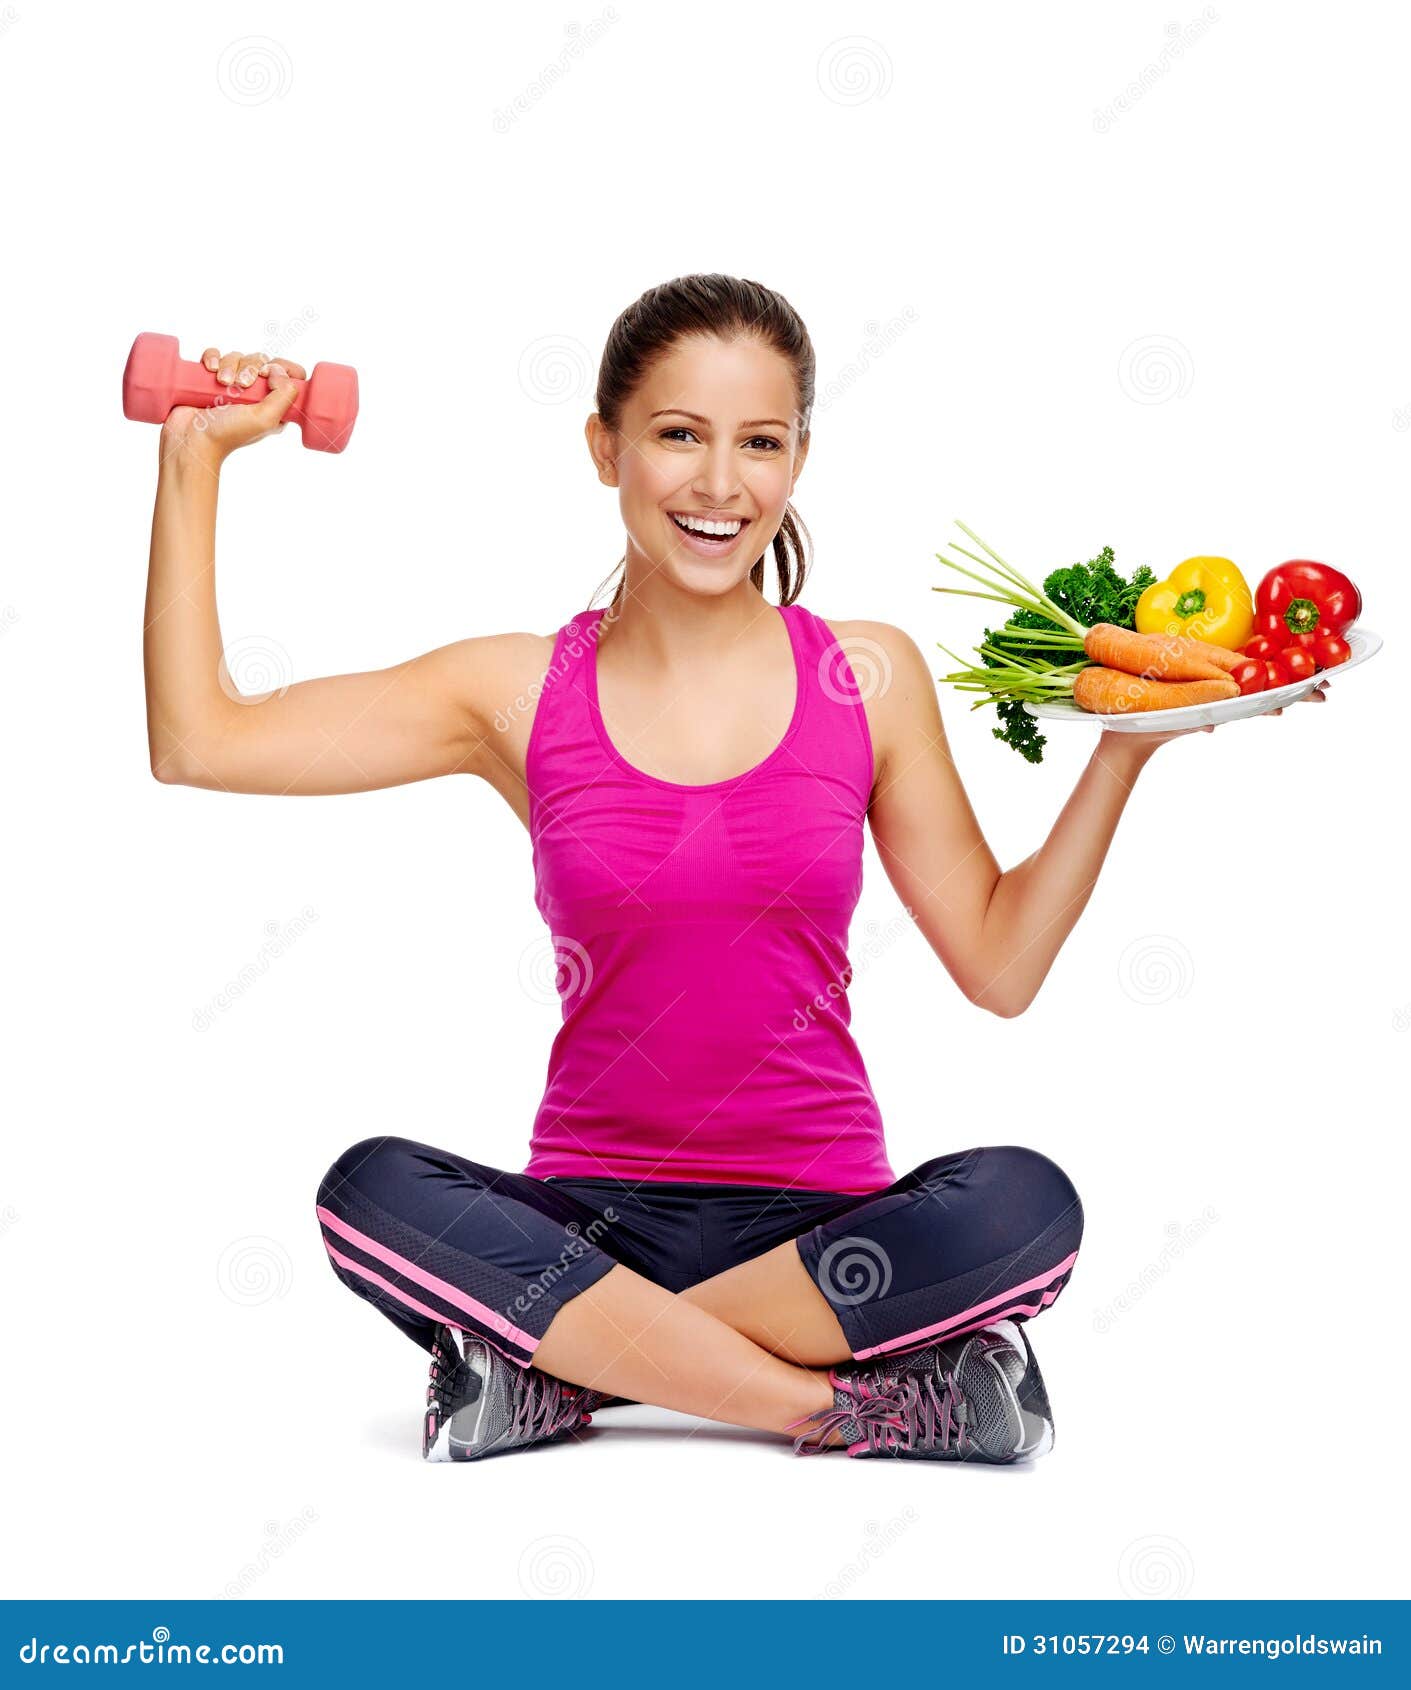 Healthy eating and exercise for weightloss diet concept.